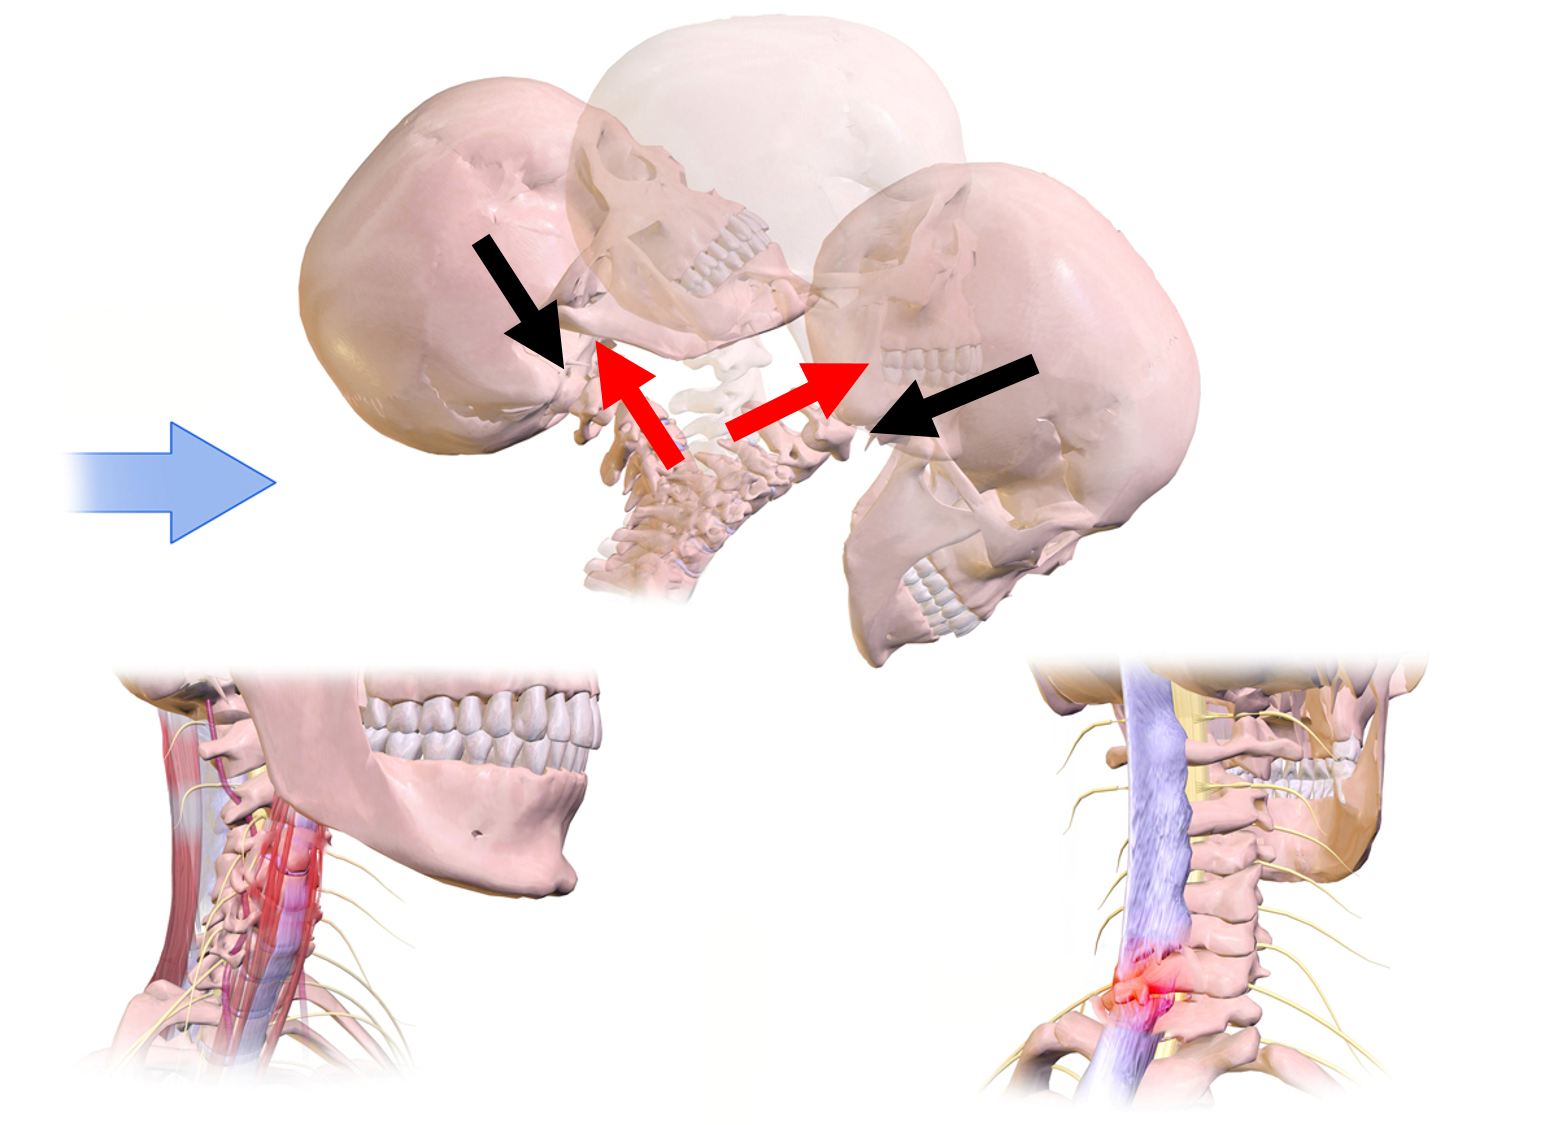 First image: The spine in a near vertical position while the head is moving from an extreme rearward position forward to a face-down position. Force pairs of equal length and opposite direction shown the force of the neck on the head and head back on the neck. Second and third images: Regions of injury on the front of the neck (soft tissue) and back of the neck (soft tissue and spine) are highlighted.